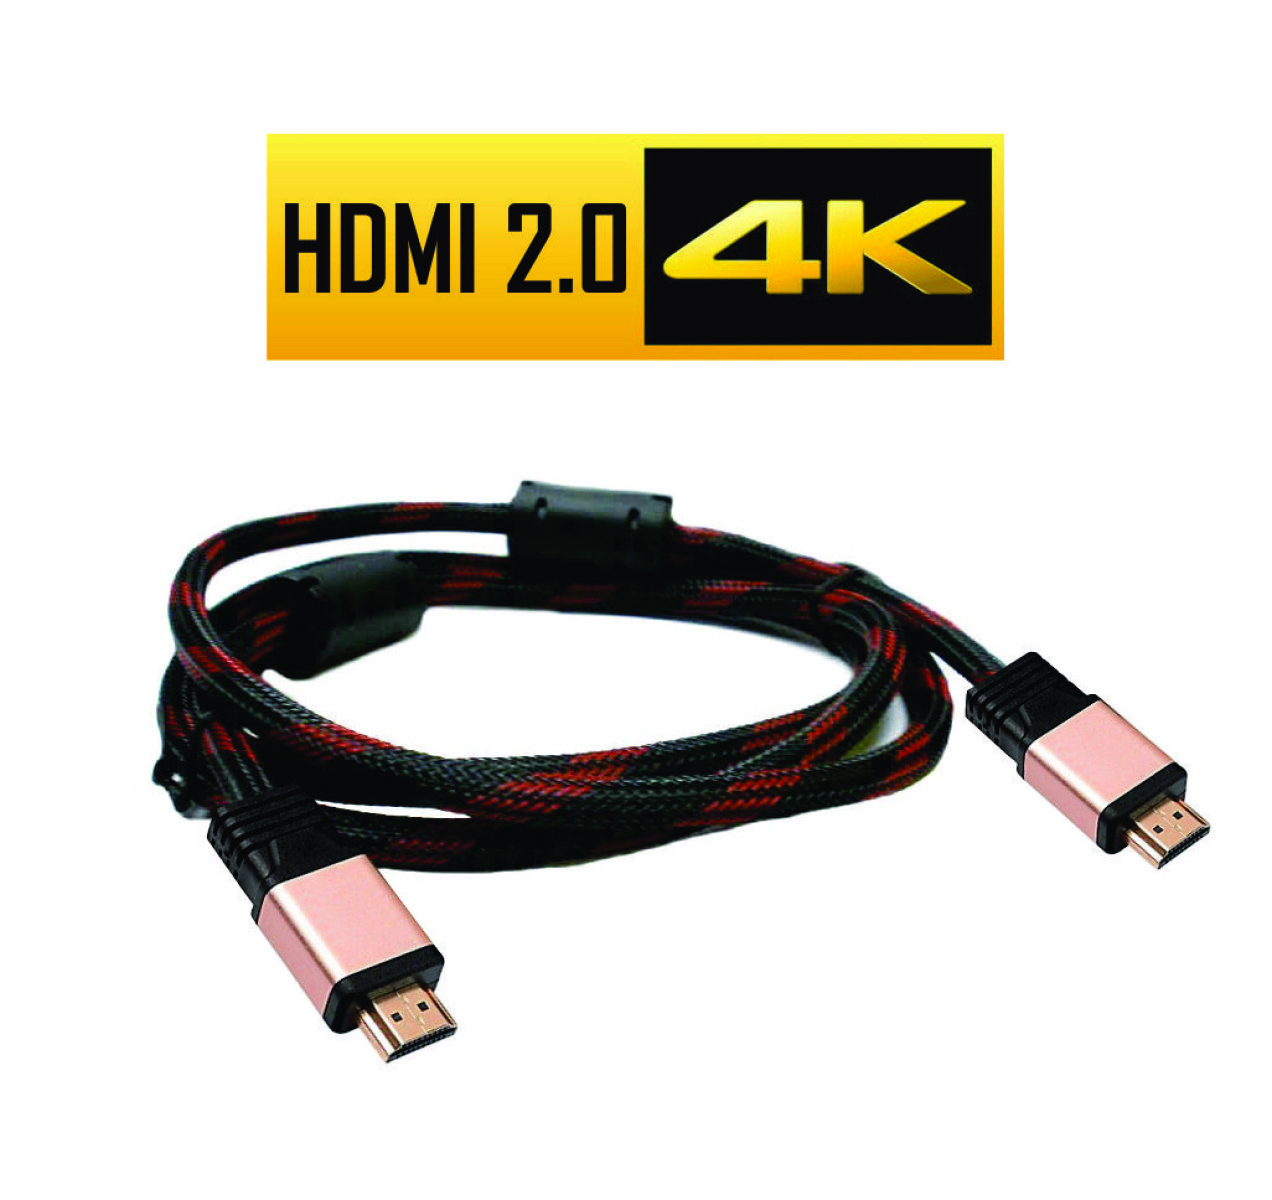 Cable HDMI 2.0 4K 5 M - 001 